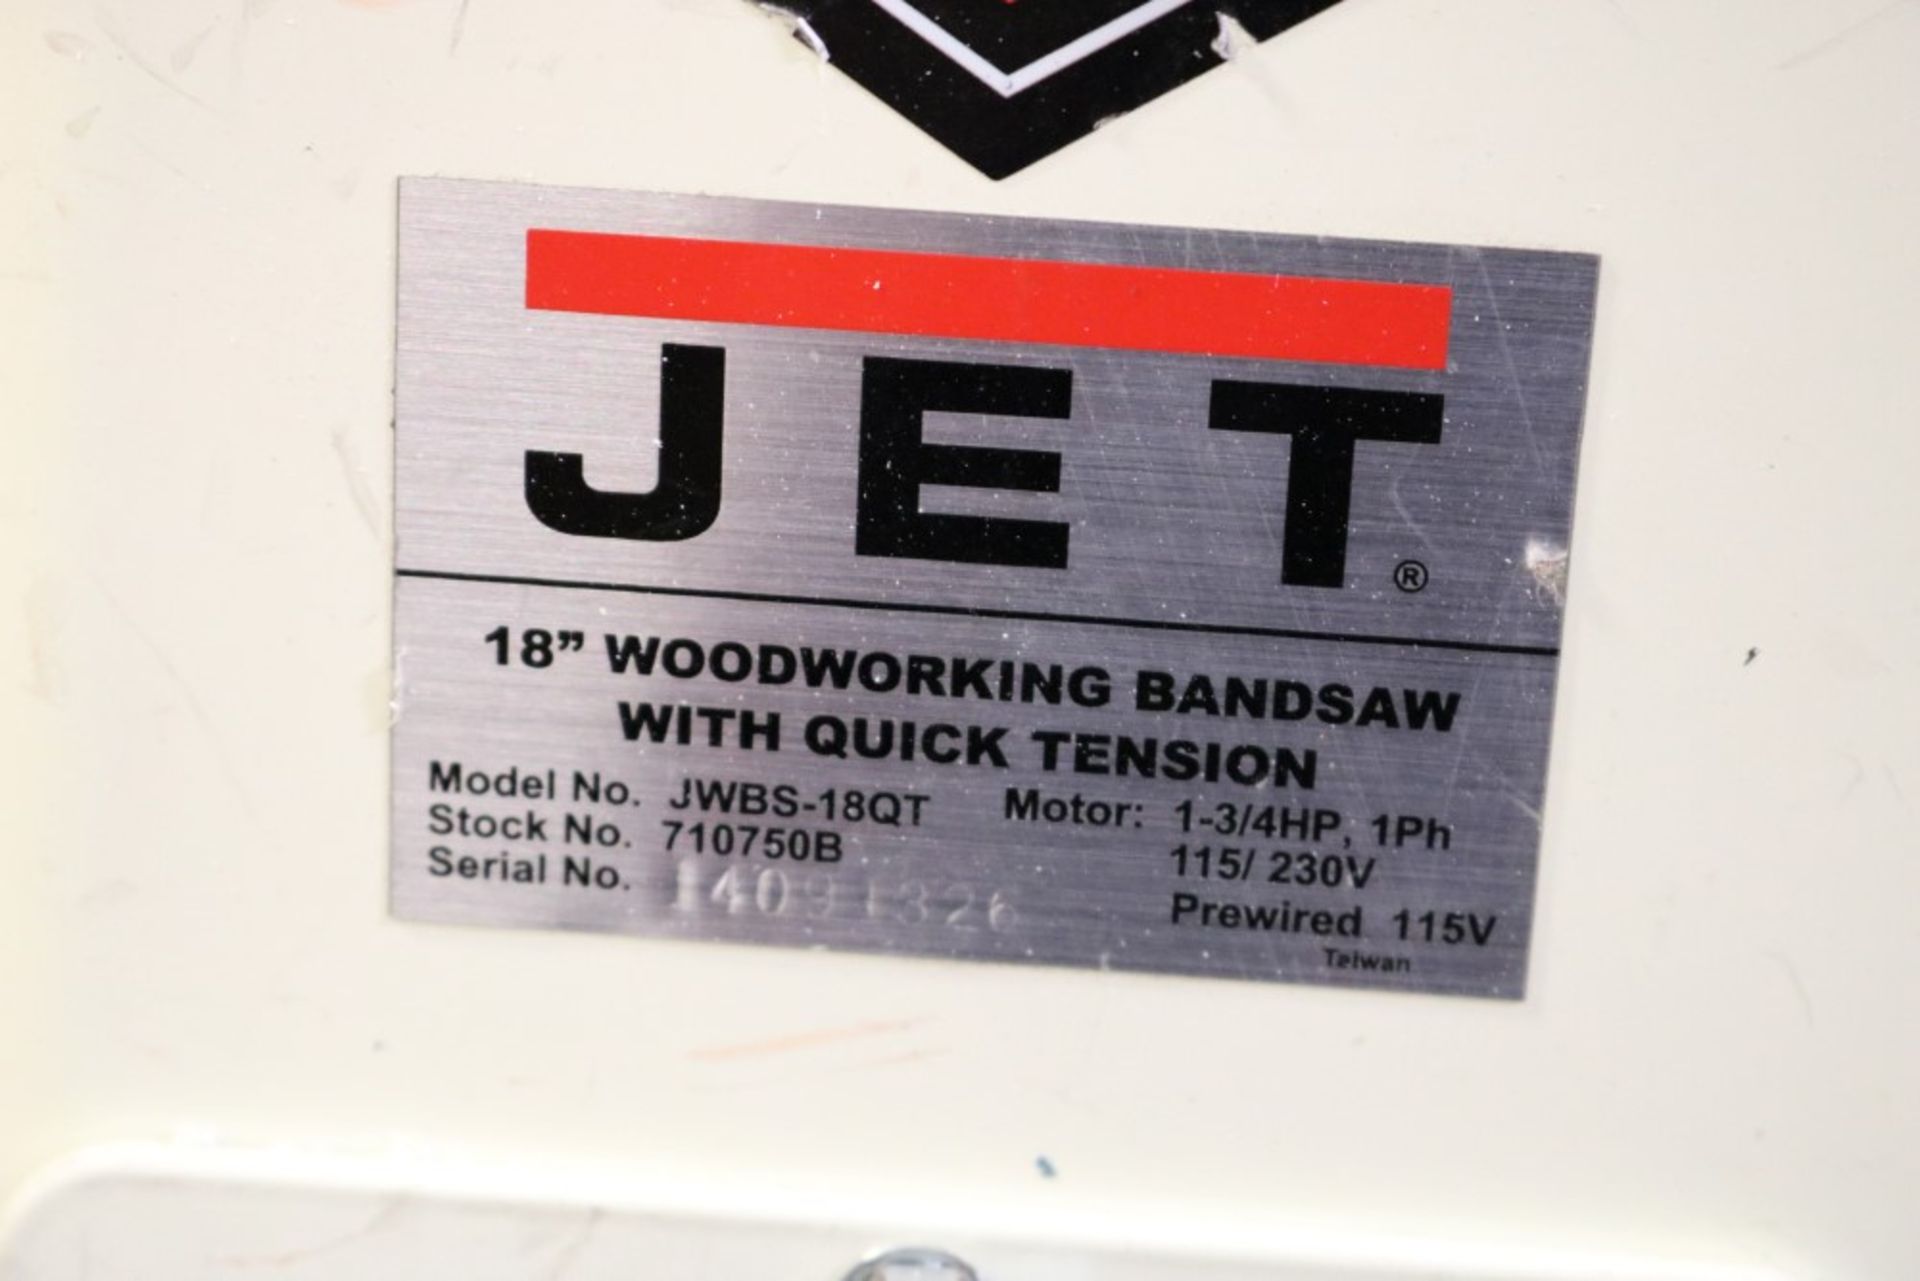 Jet 18" Woodworking Vertical Bandsaw with Quick Tension 1 3/4 HP Model JWBS-18QT - Image 2 of 8